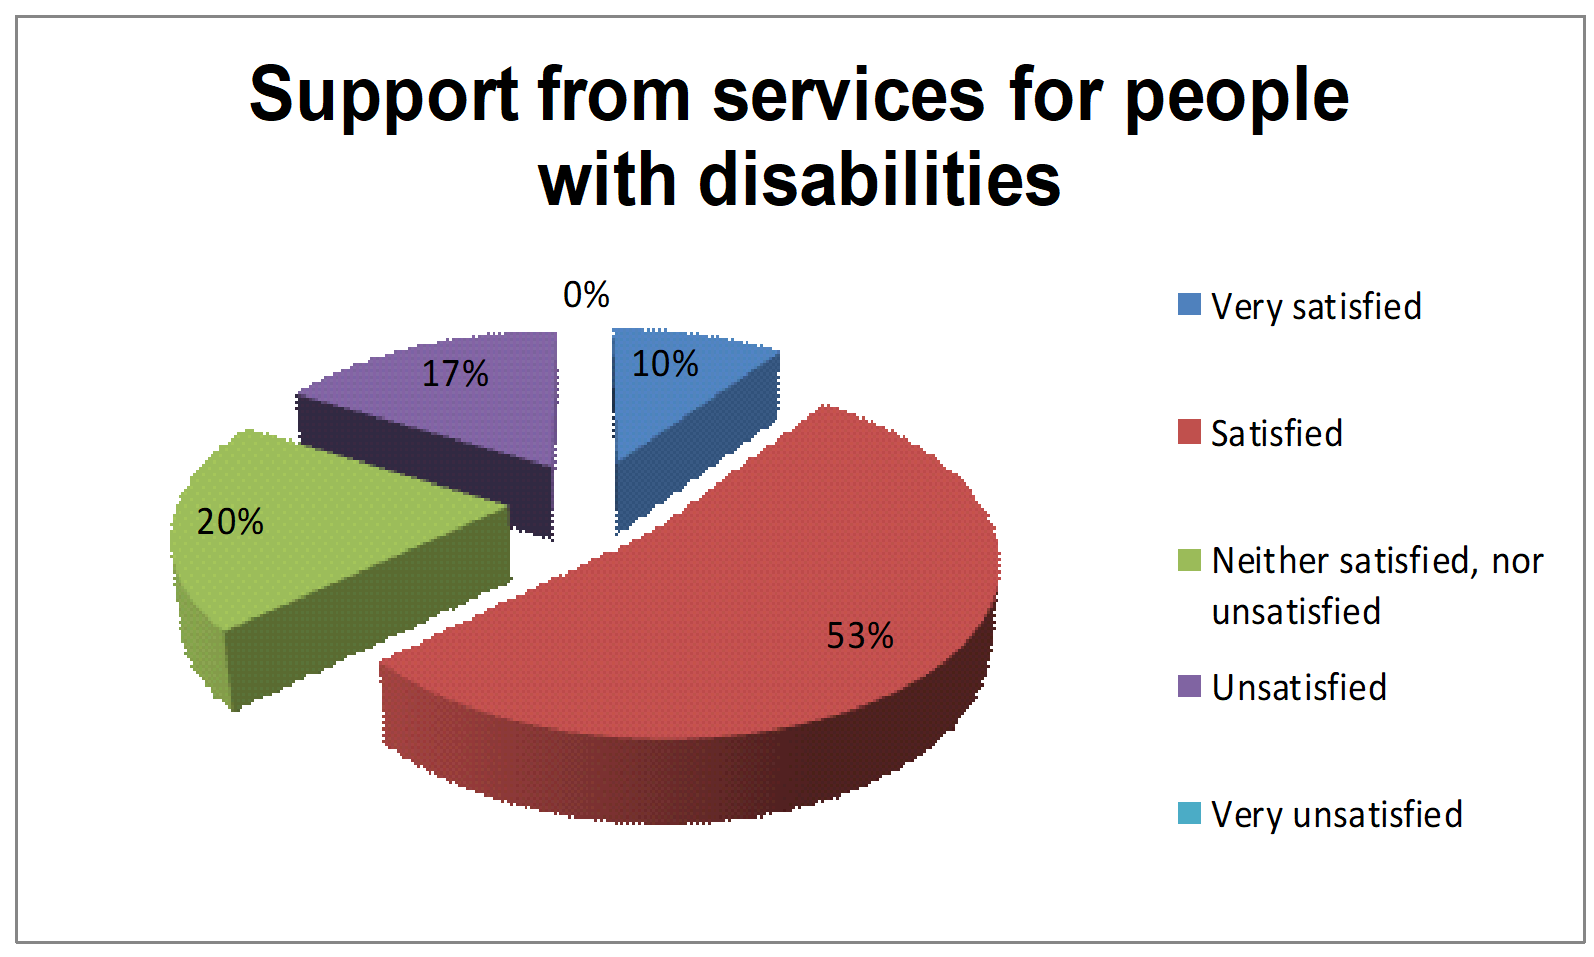 Support from services for disabled persons